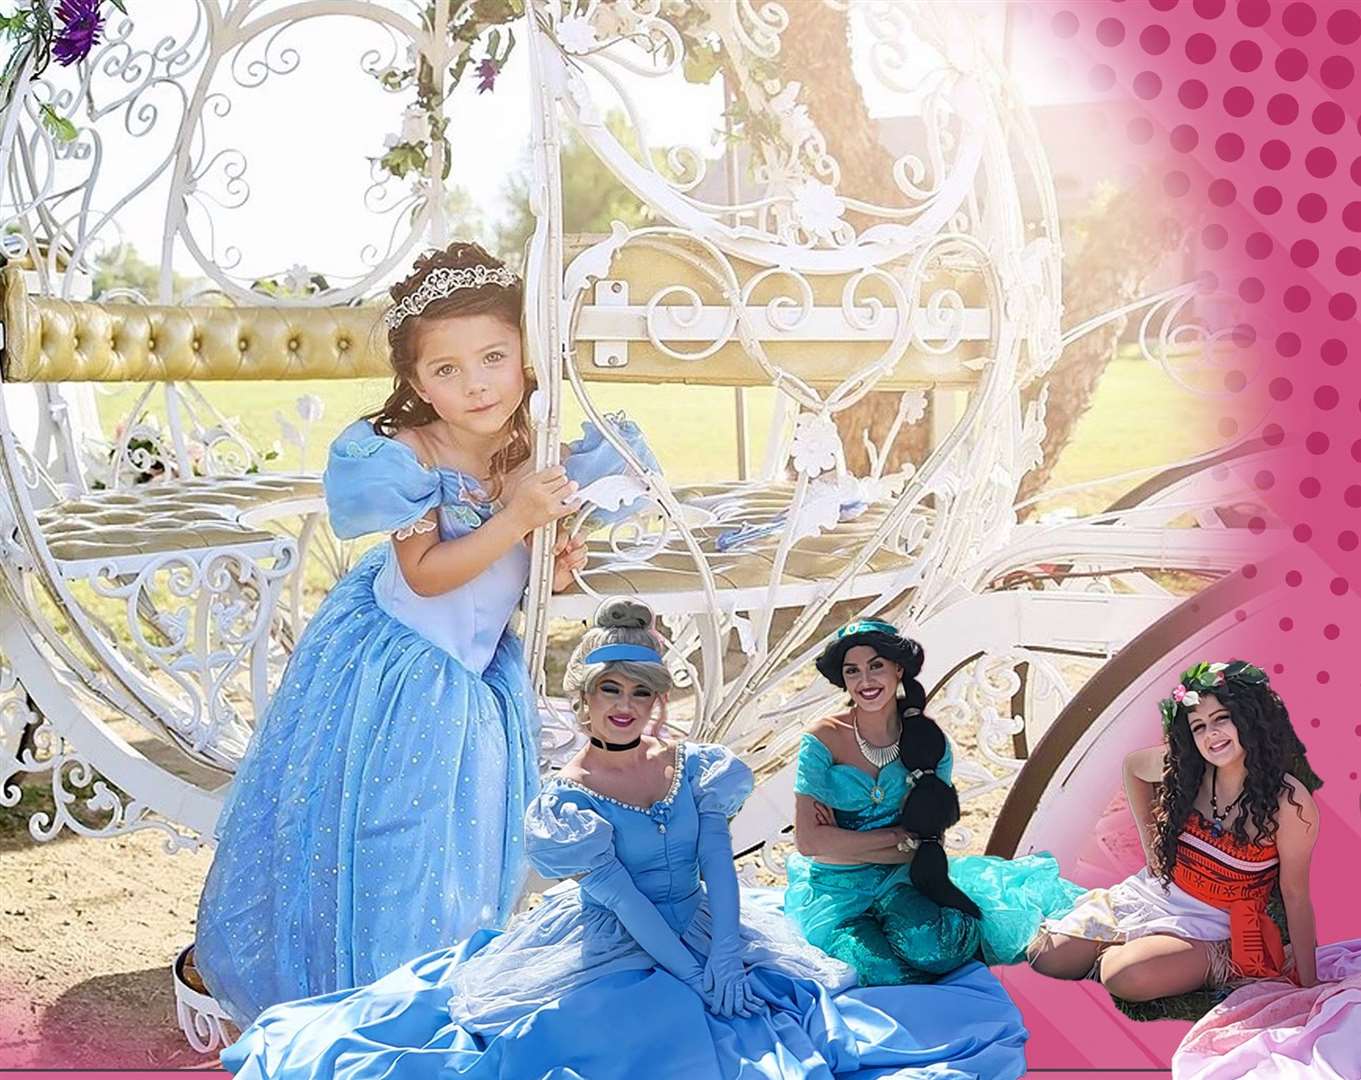 Youngsters can have their picture taken in Cinderella’s carriage